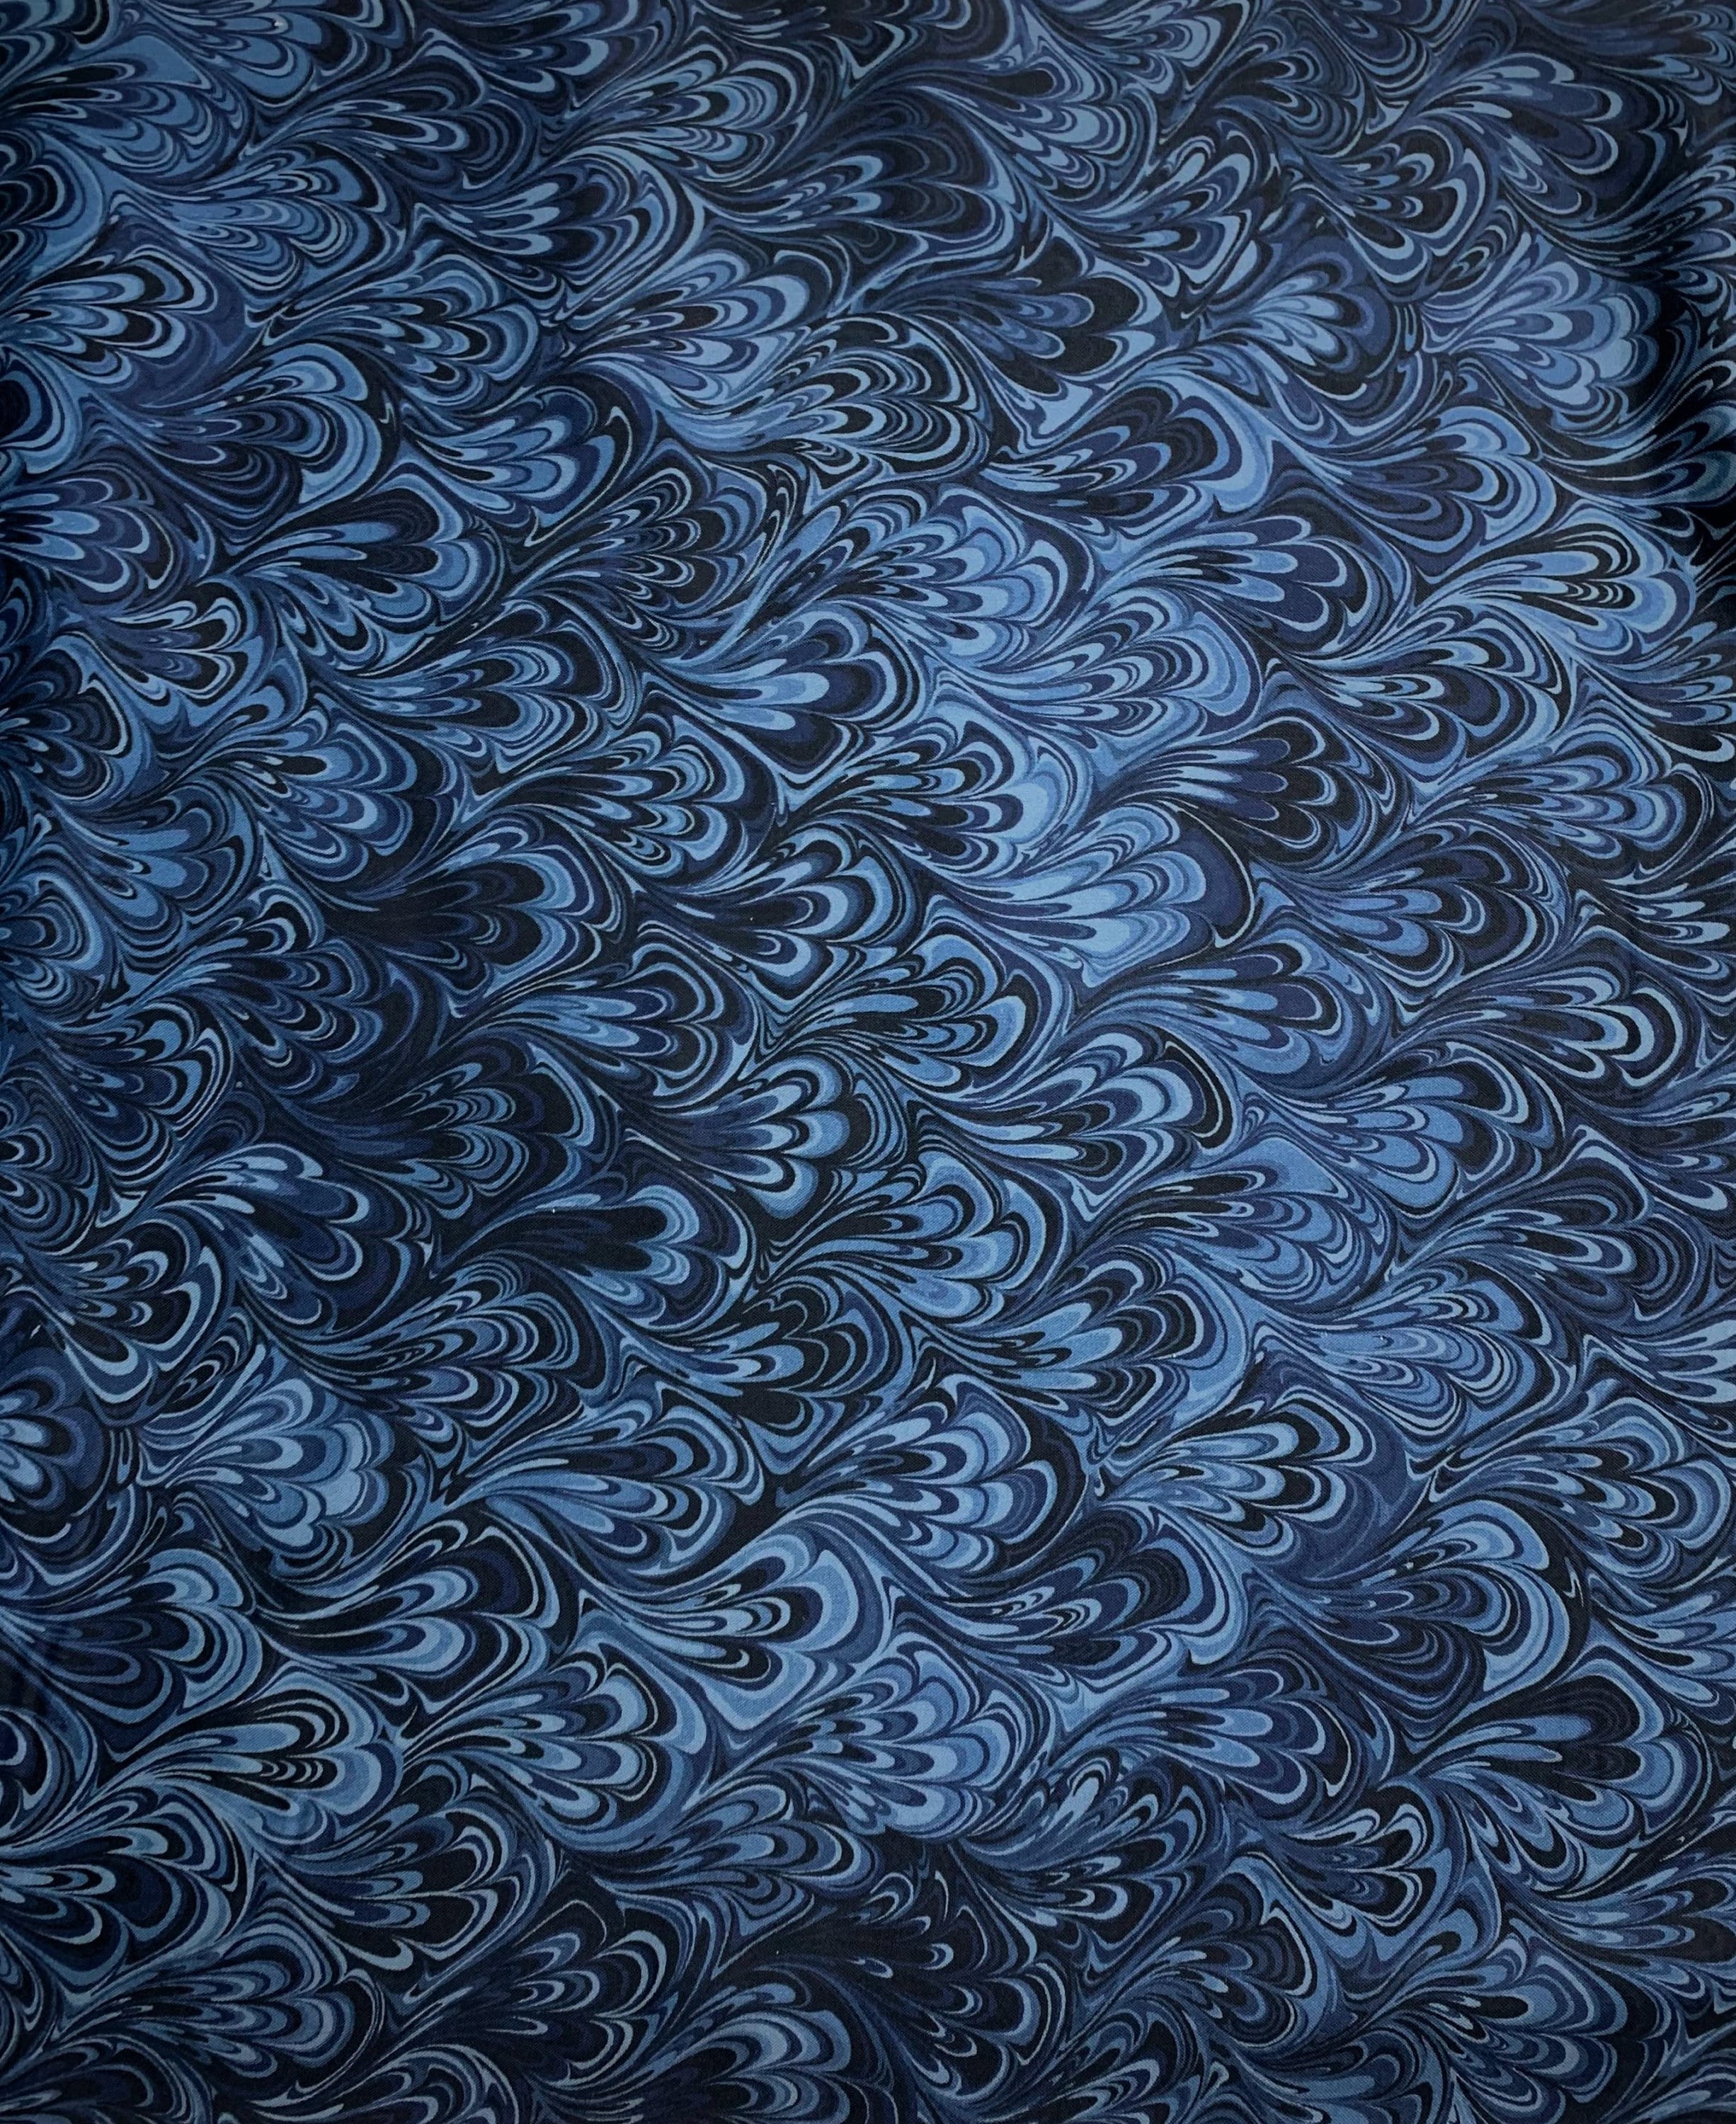 Northcott The Art of Marbling Marble 2 Cotton Fabric by the Yard or Select Length 23401-48 Artful Indigo